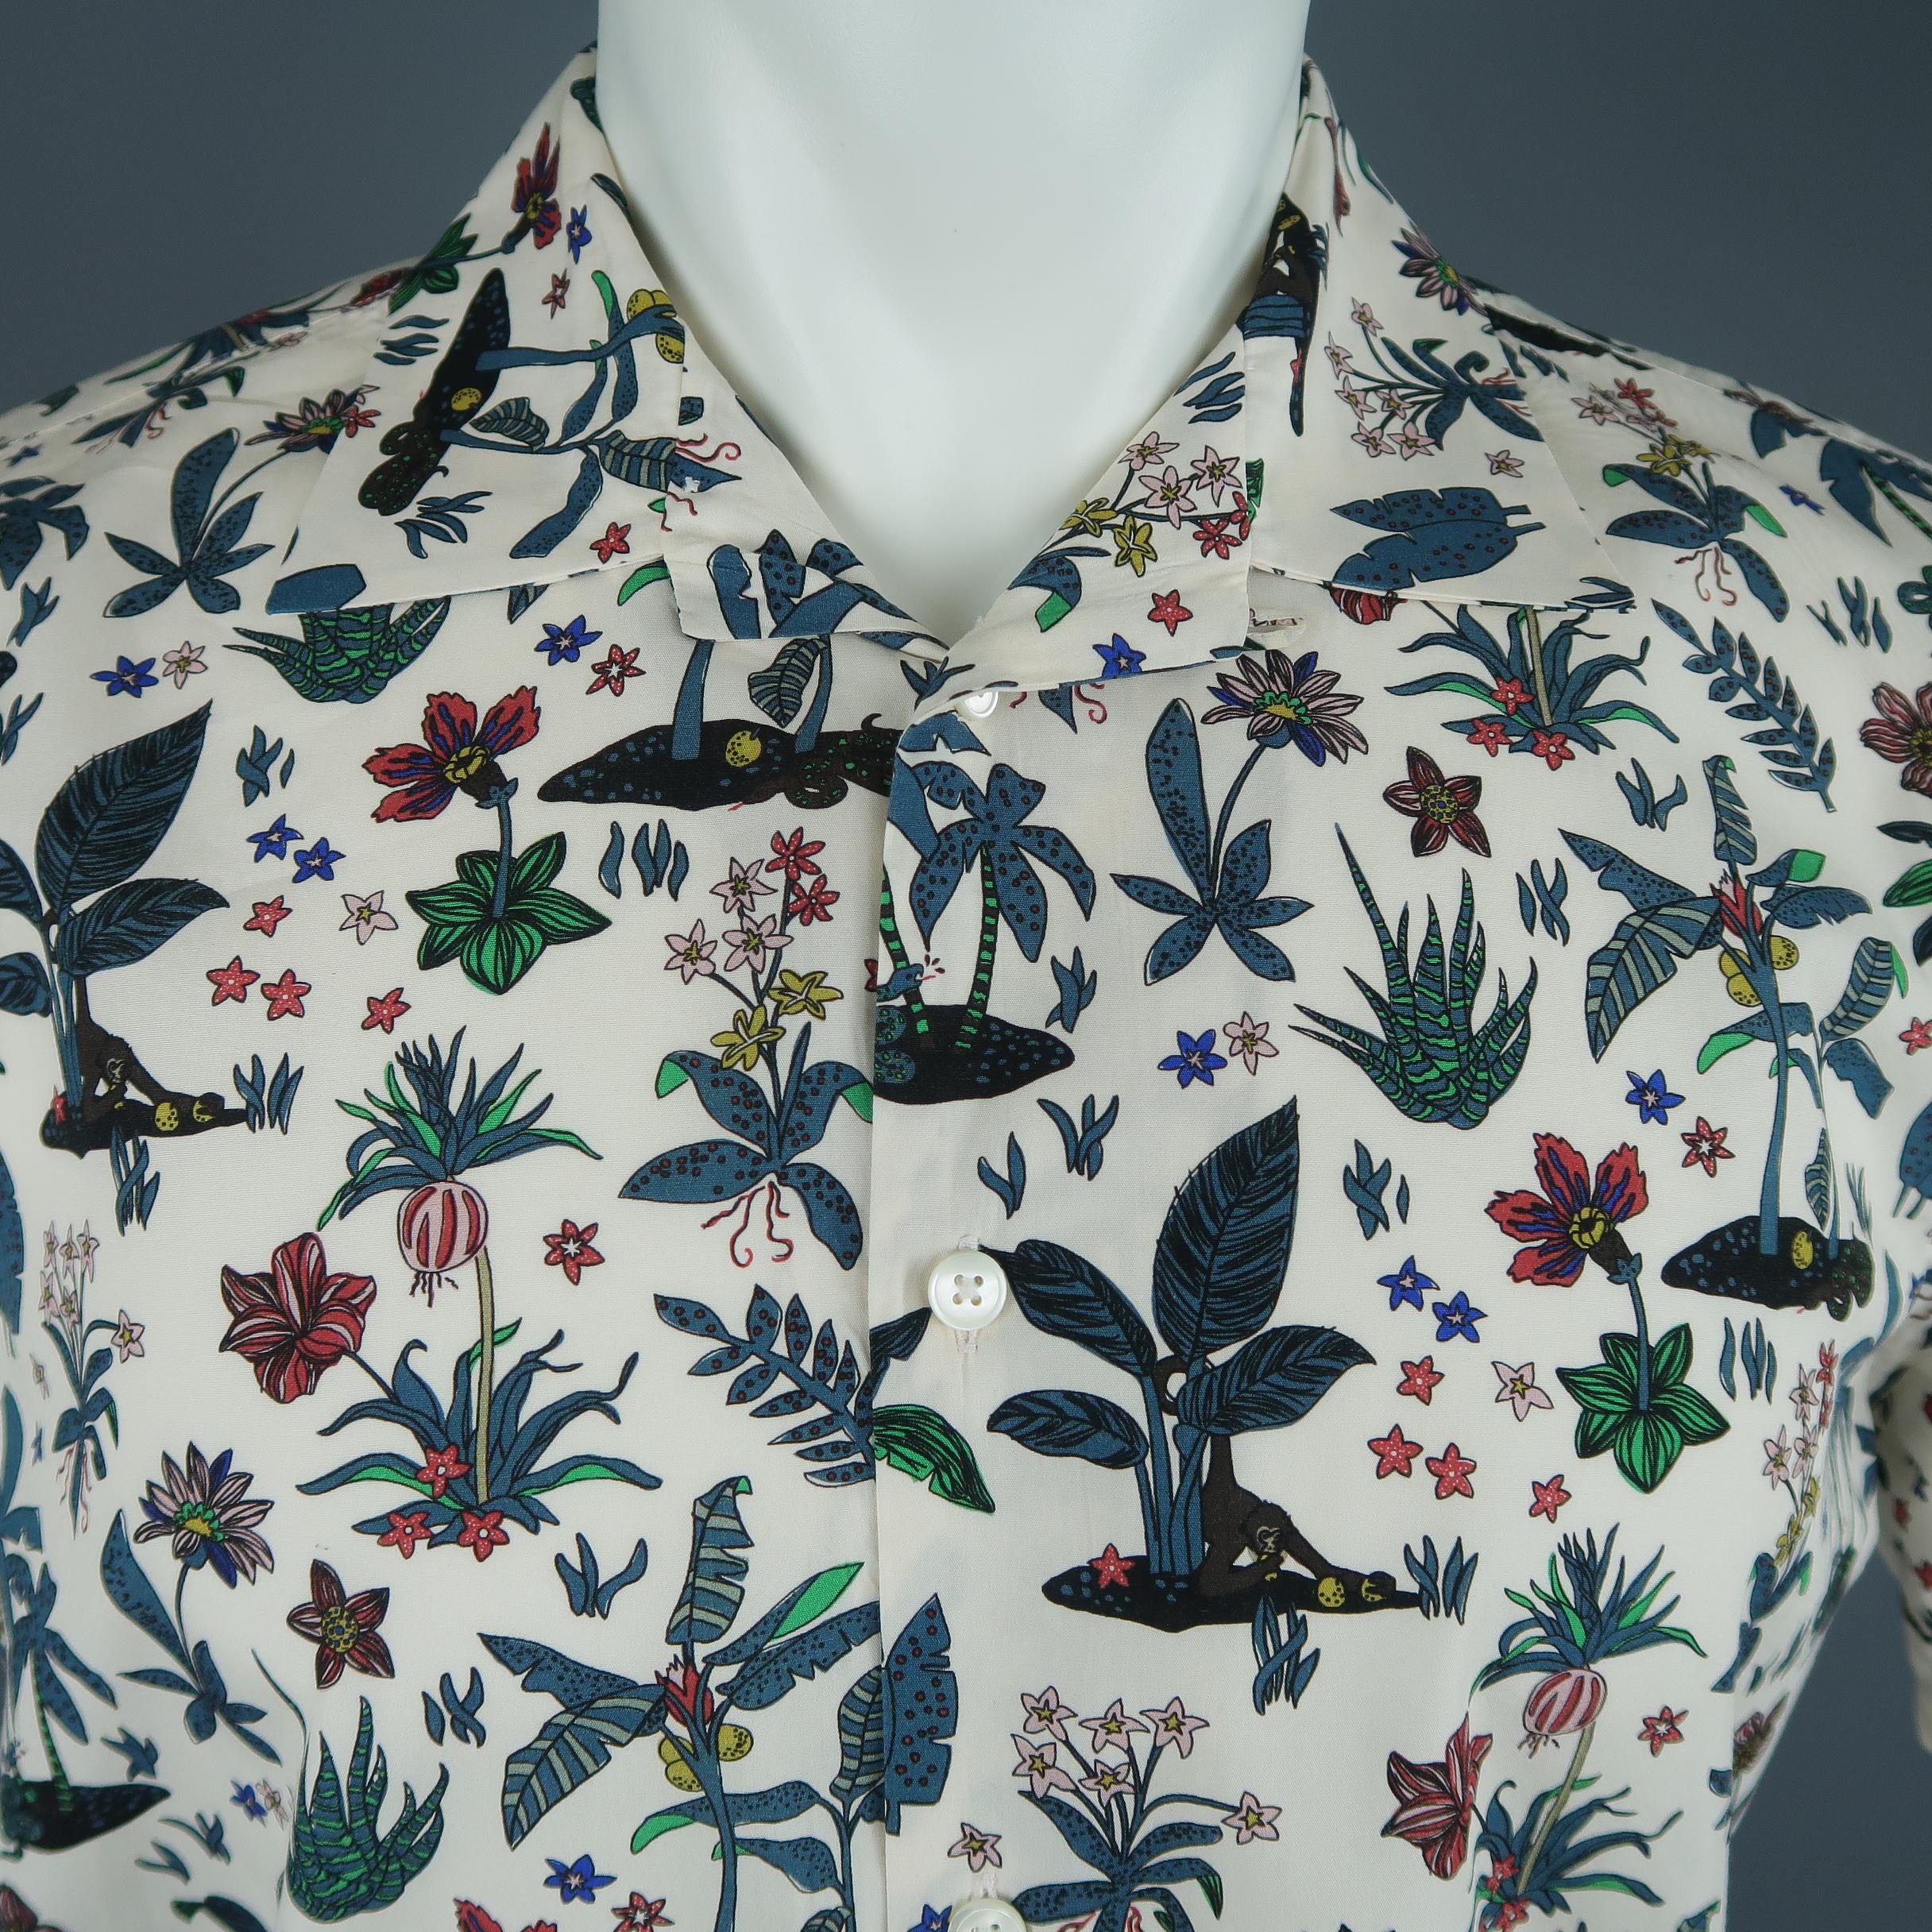 P.S. by PAUL SMITH camp shirt comes in white cotton with a monkey island Hawaiian print throughout. Made in Portugal.
 
Excellent Pre-Owned Condition.
Marked: M
 
Measurements:
 
Shoulder: 17 in.
Chest: 42 in.
Sleeve: 9 in.
Length: 28 in.